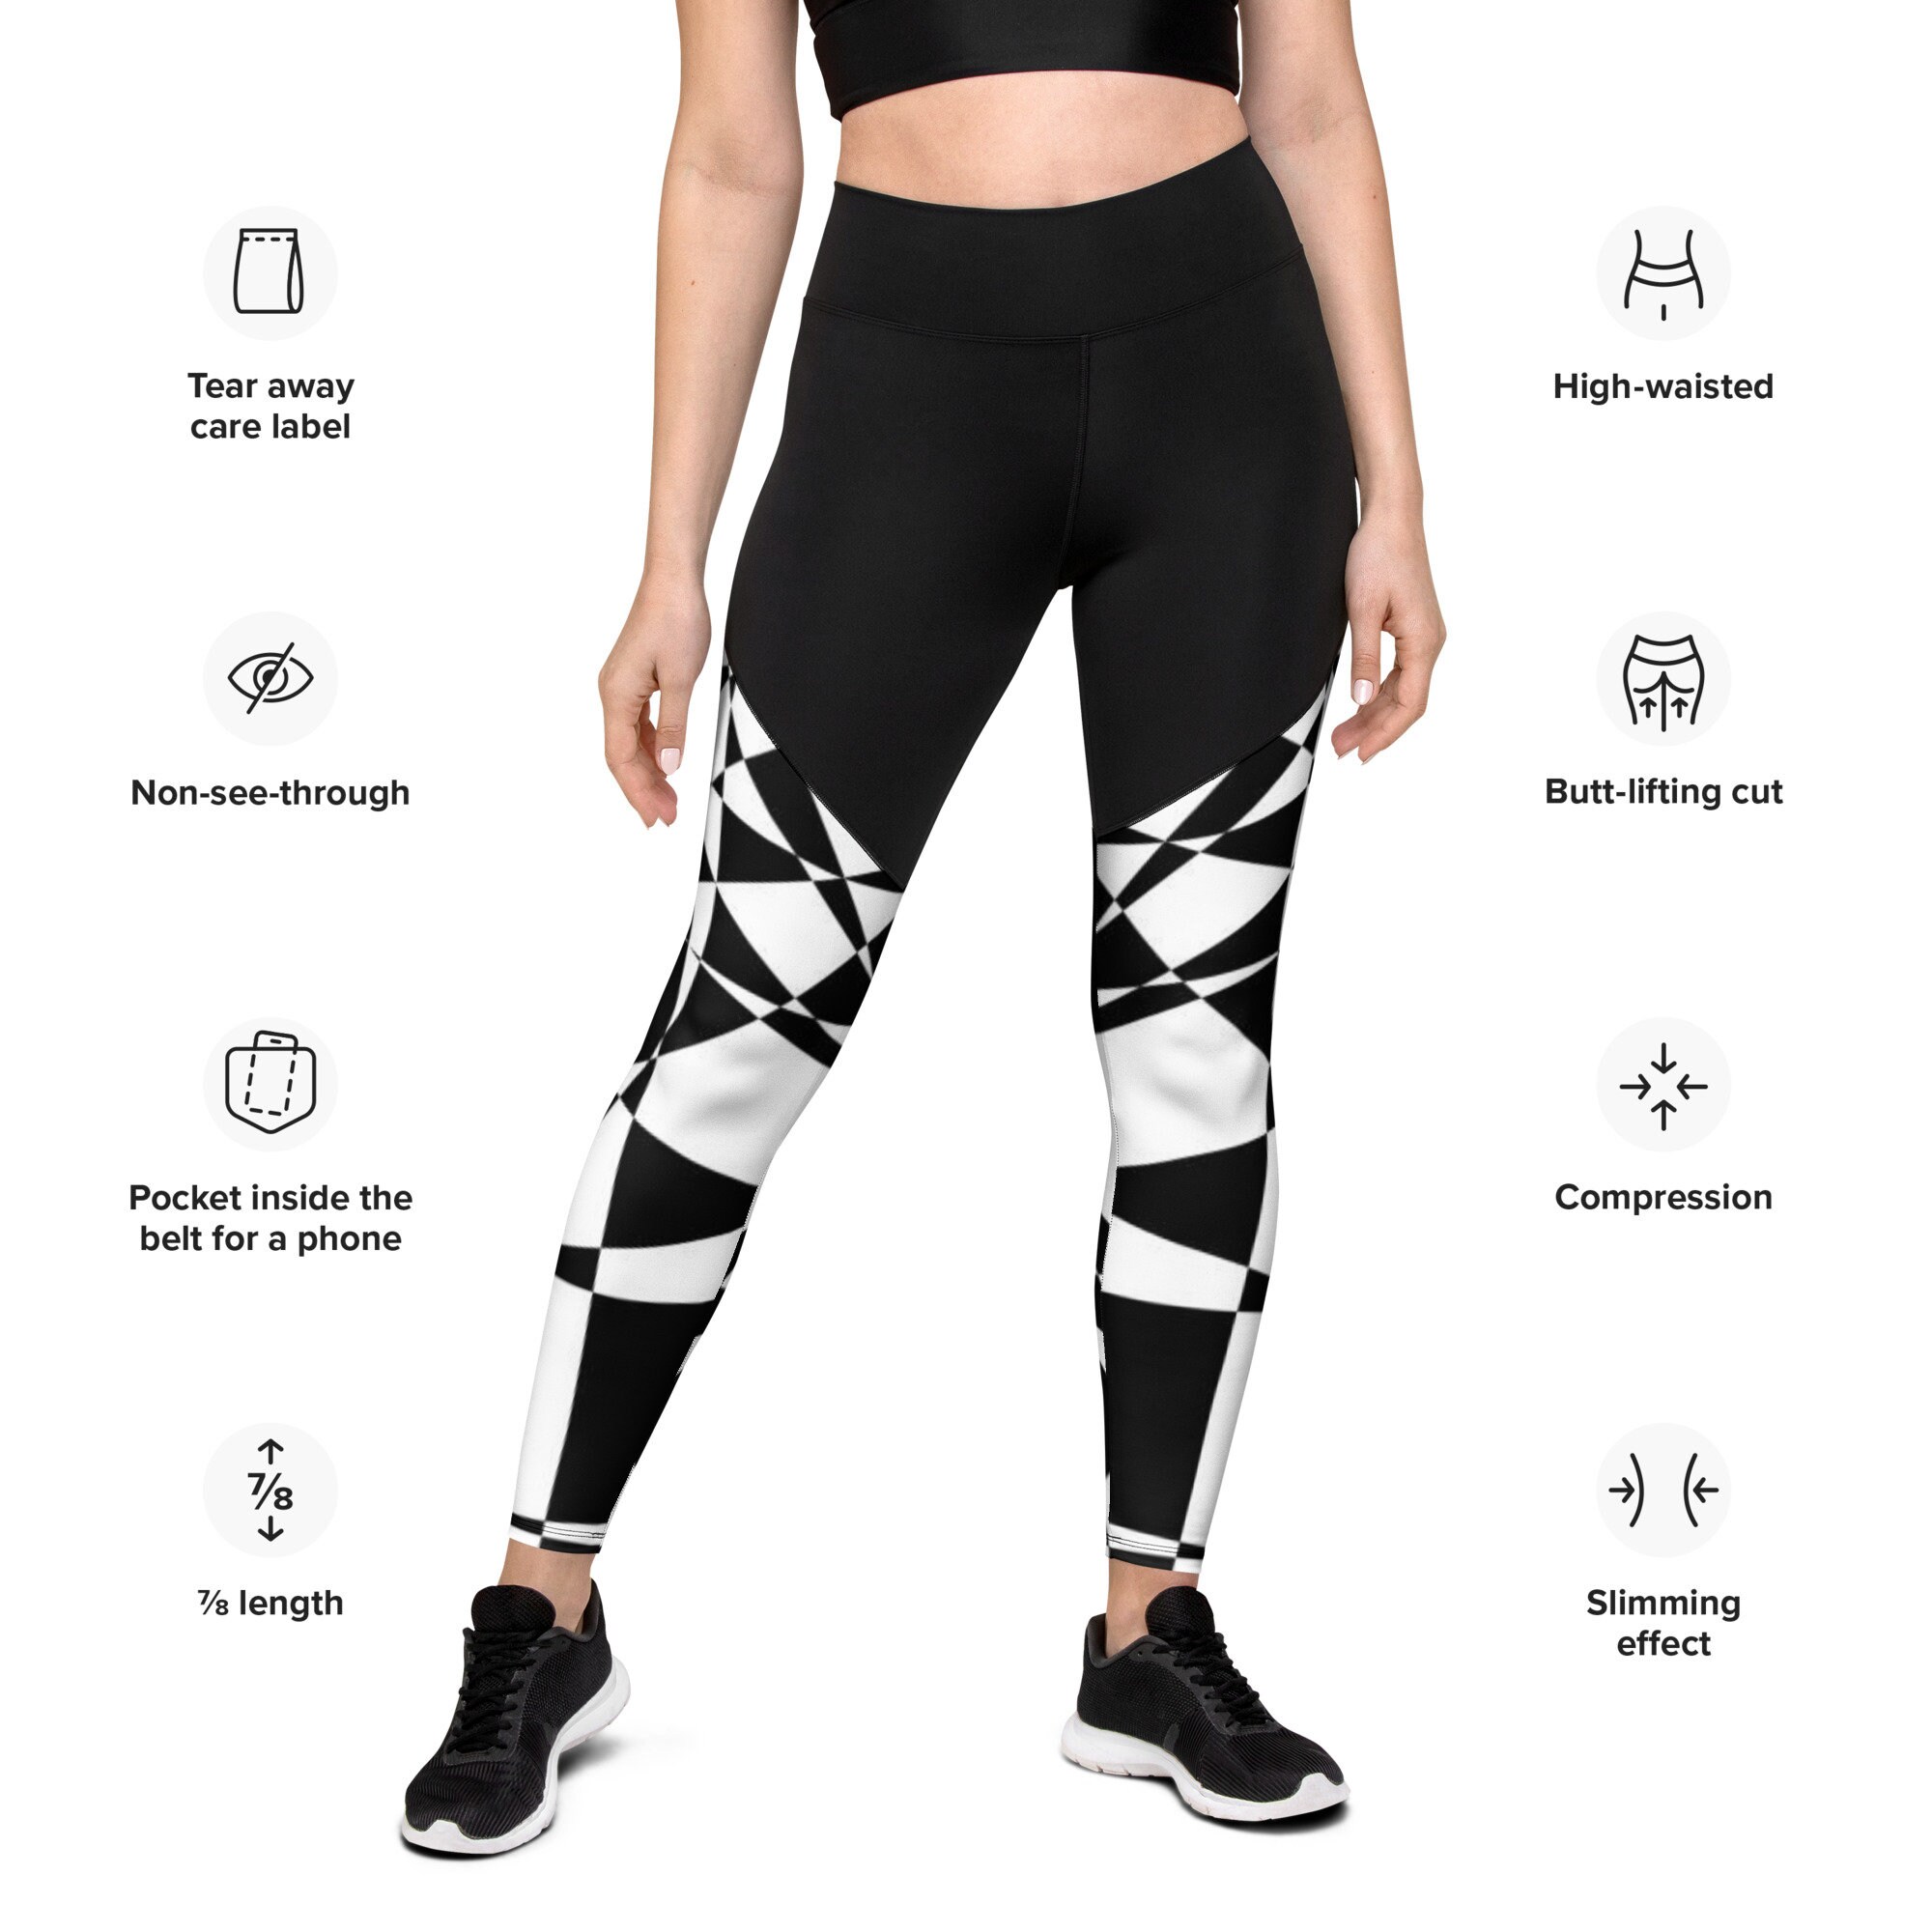 J'adore white designer legging with black skulls - black and white  gifts unique special b&w style